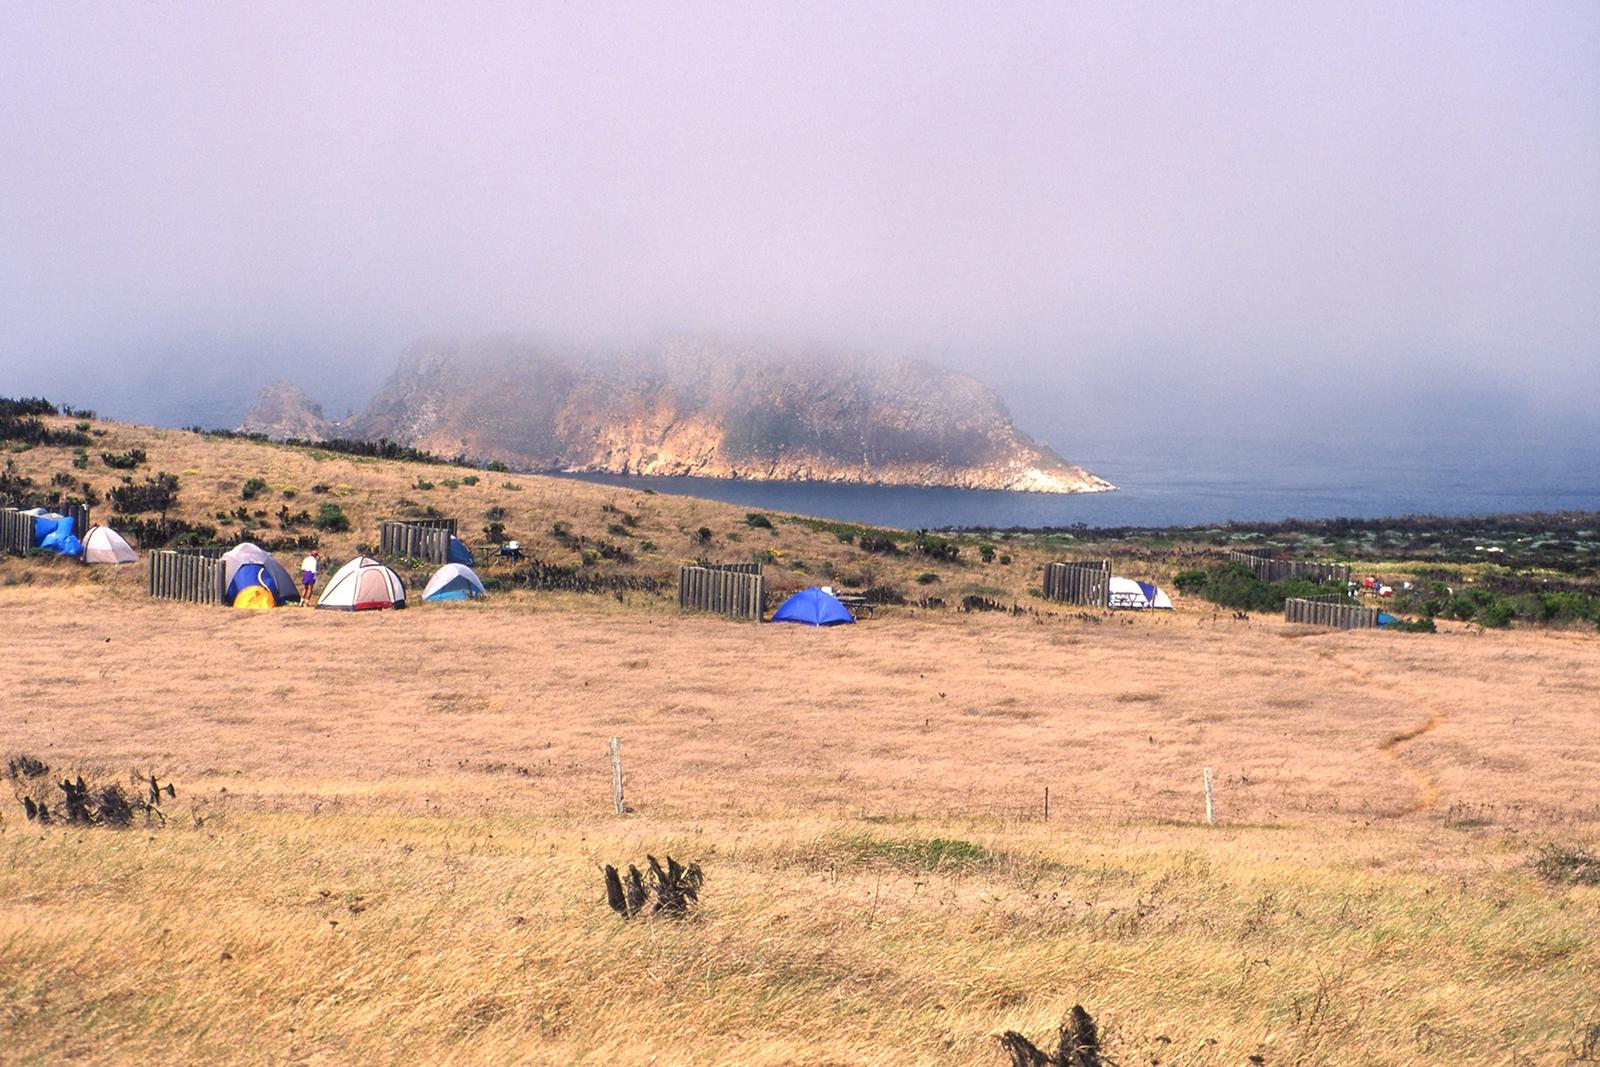 Tents and 5-foot tall windbreaks perches on an ocean bluff overlooking an islet covered in fog. SAN MIGUEL ISLAND